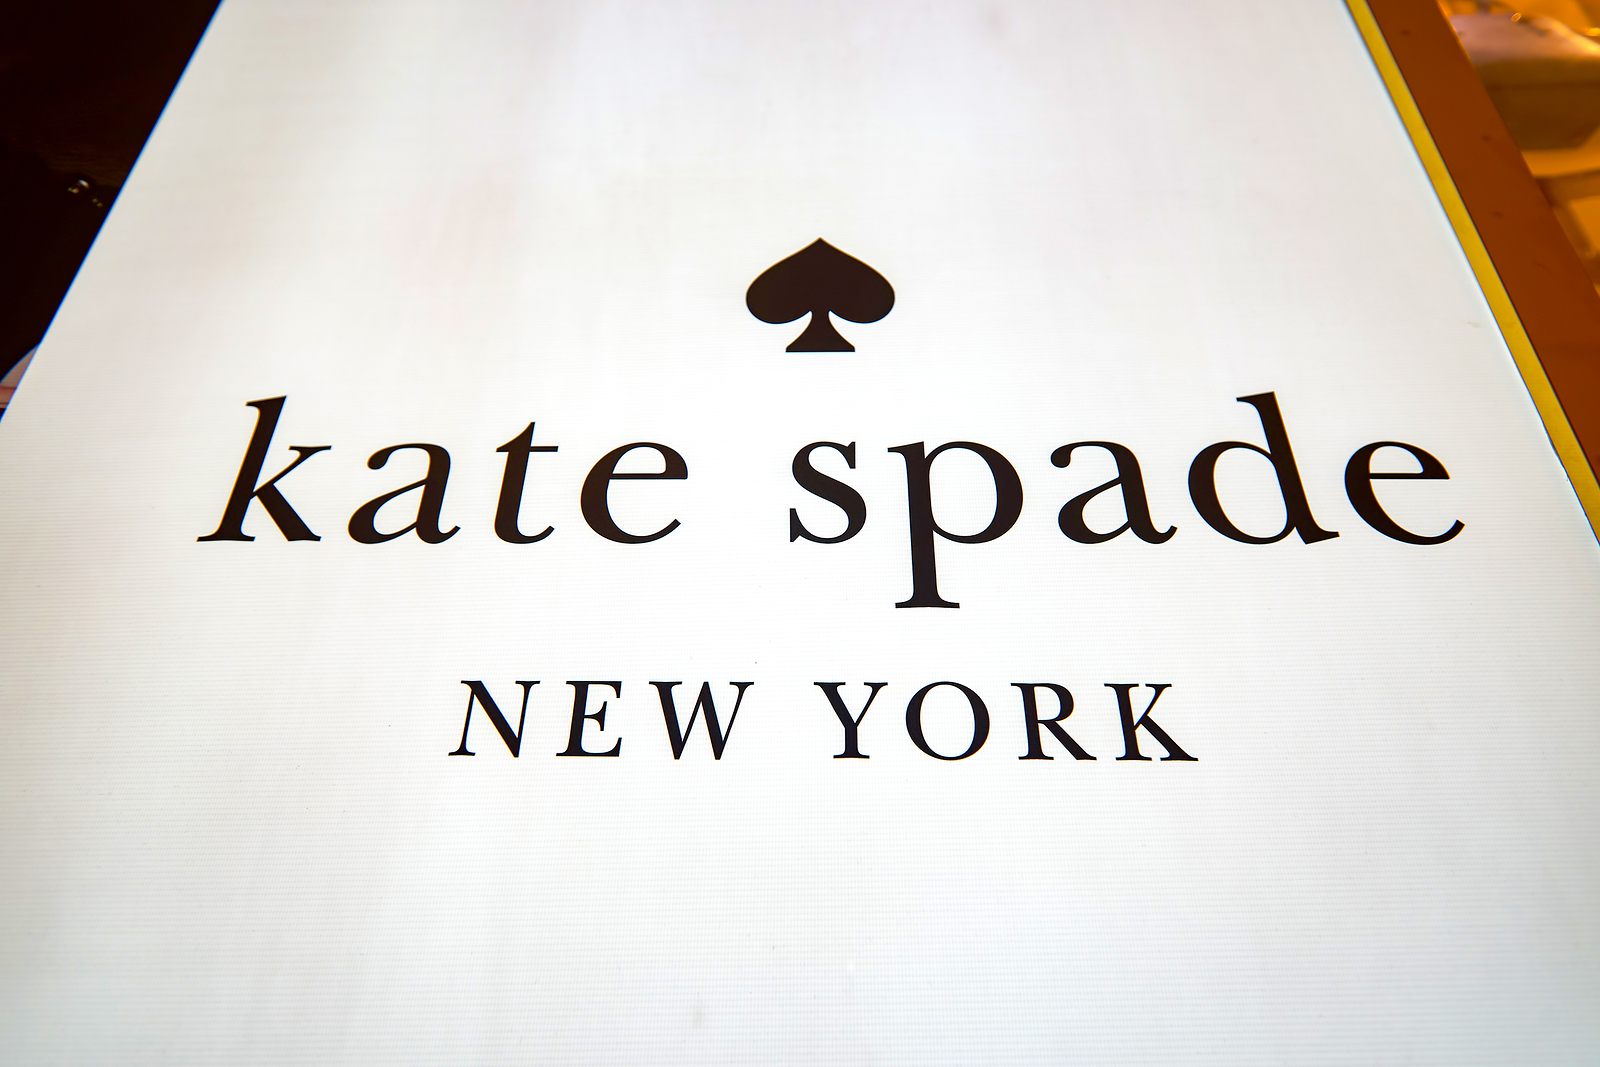 Kate Spade, suicide and the Christian woman